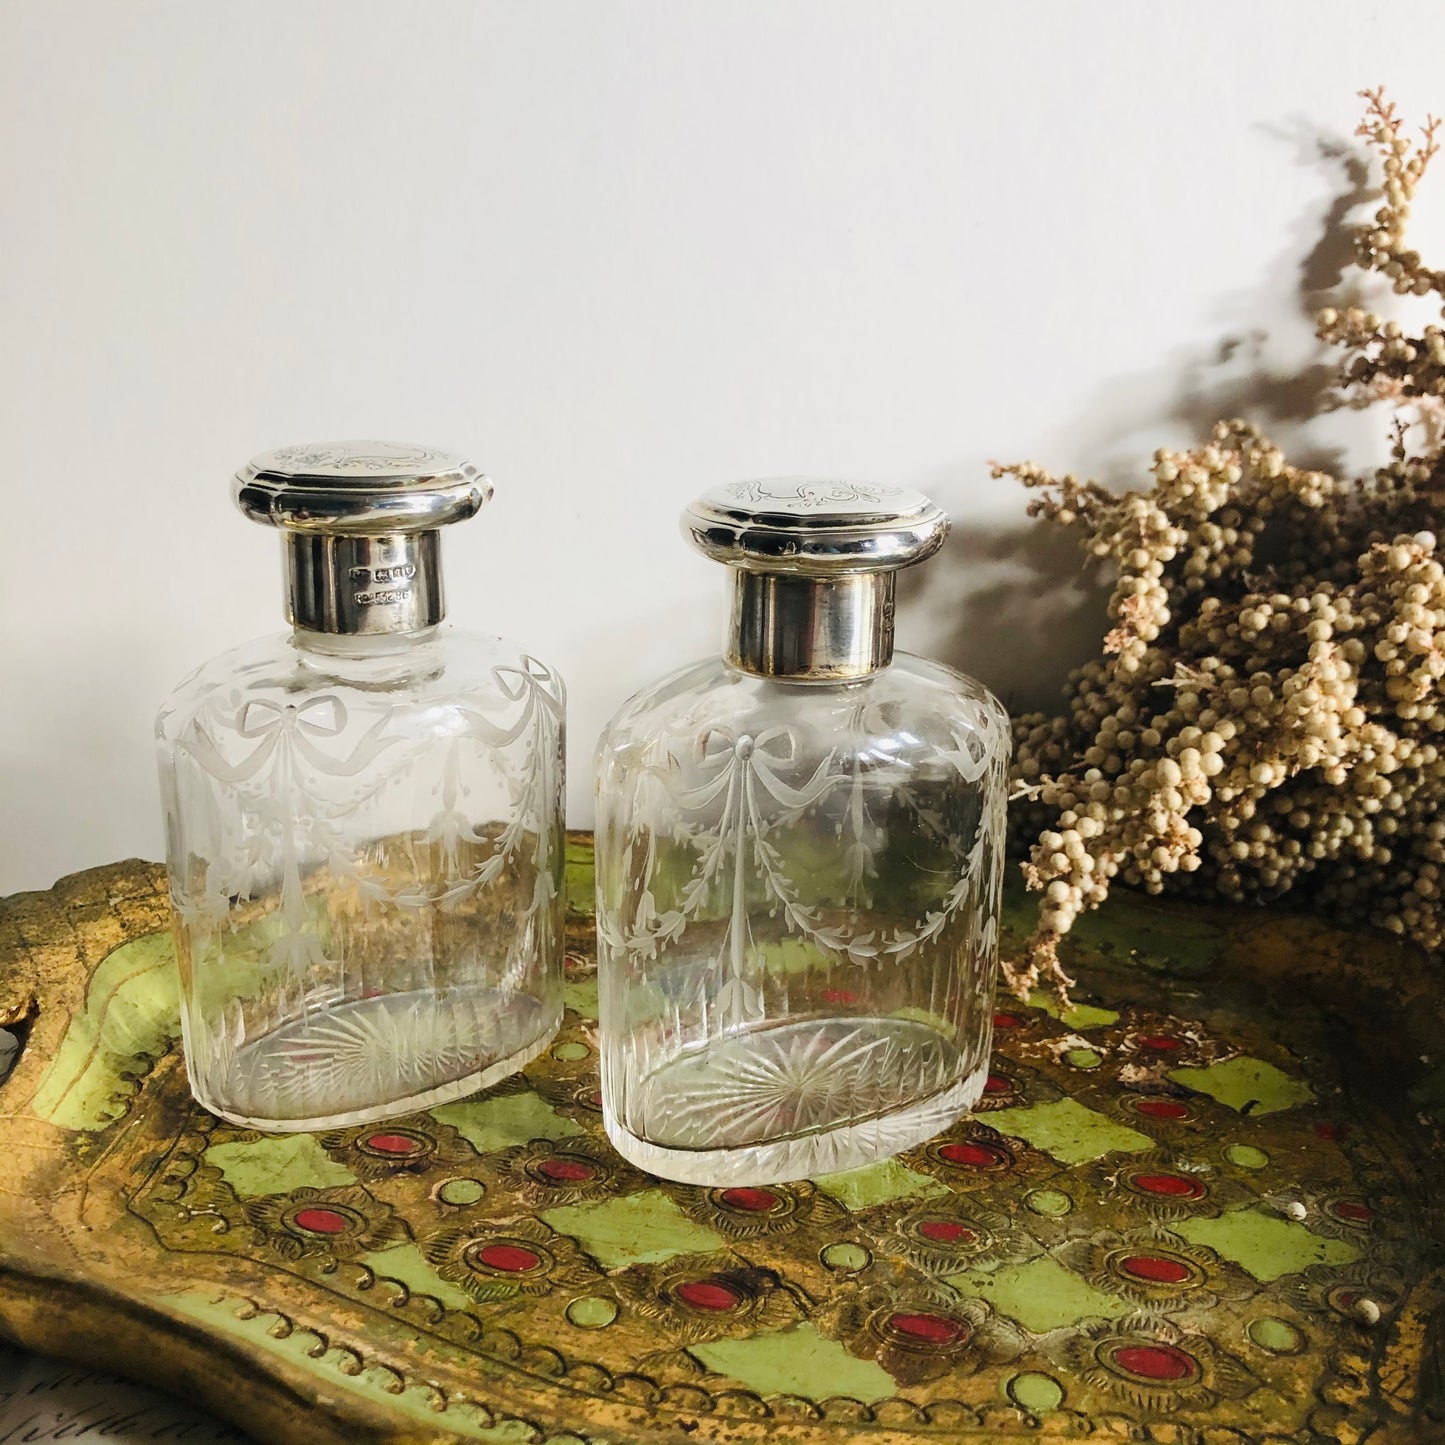 Antique Silver Topped Etched Glass Scent Bottle | 1911 London